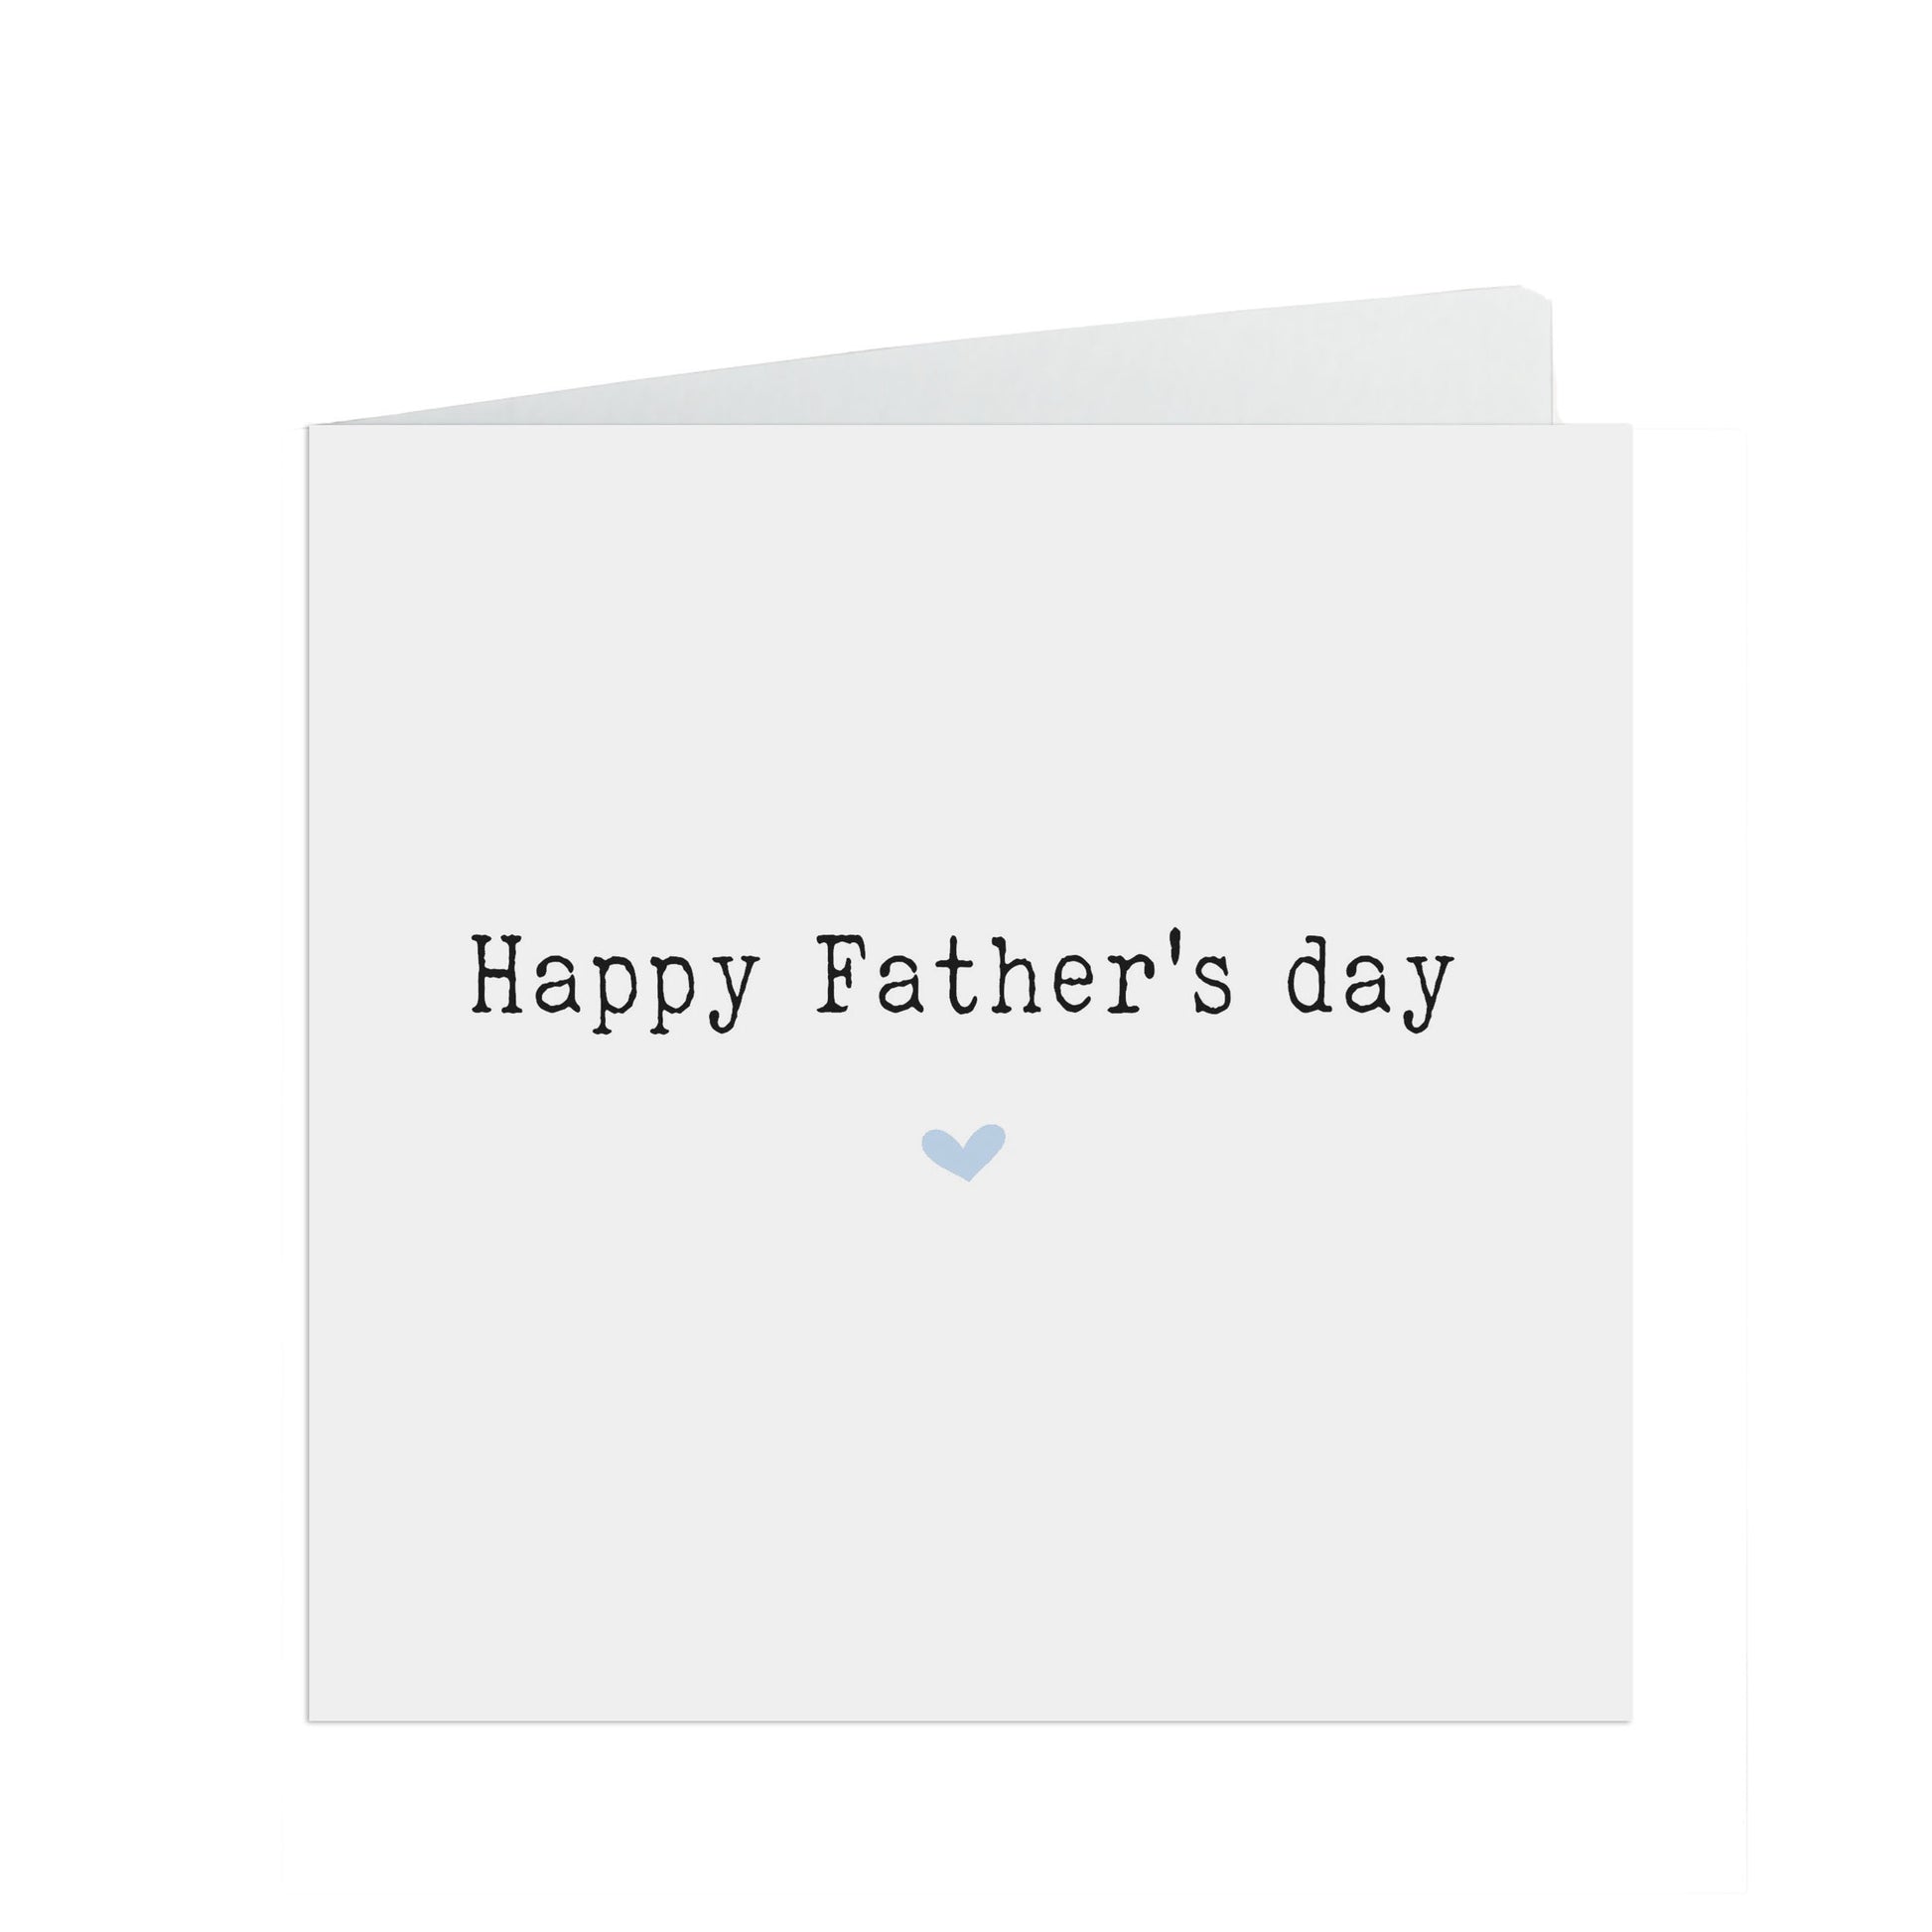  Happy Father's Day, Cute Simple Father's Day Card by PMPRINTED 